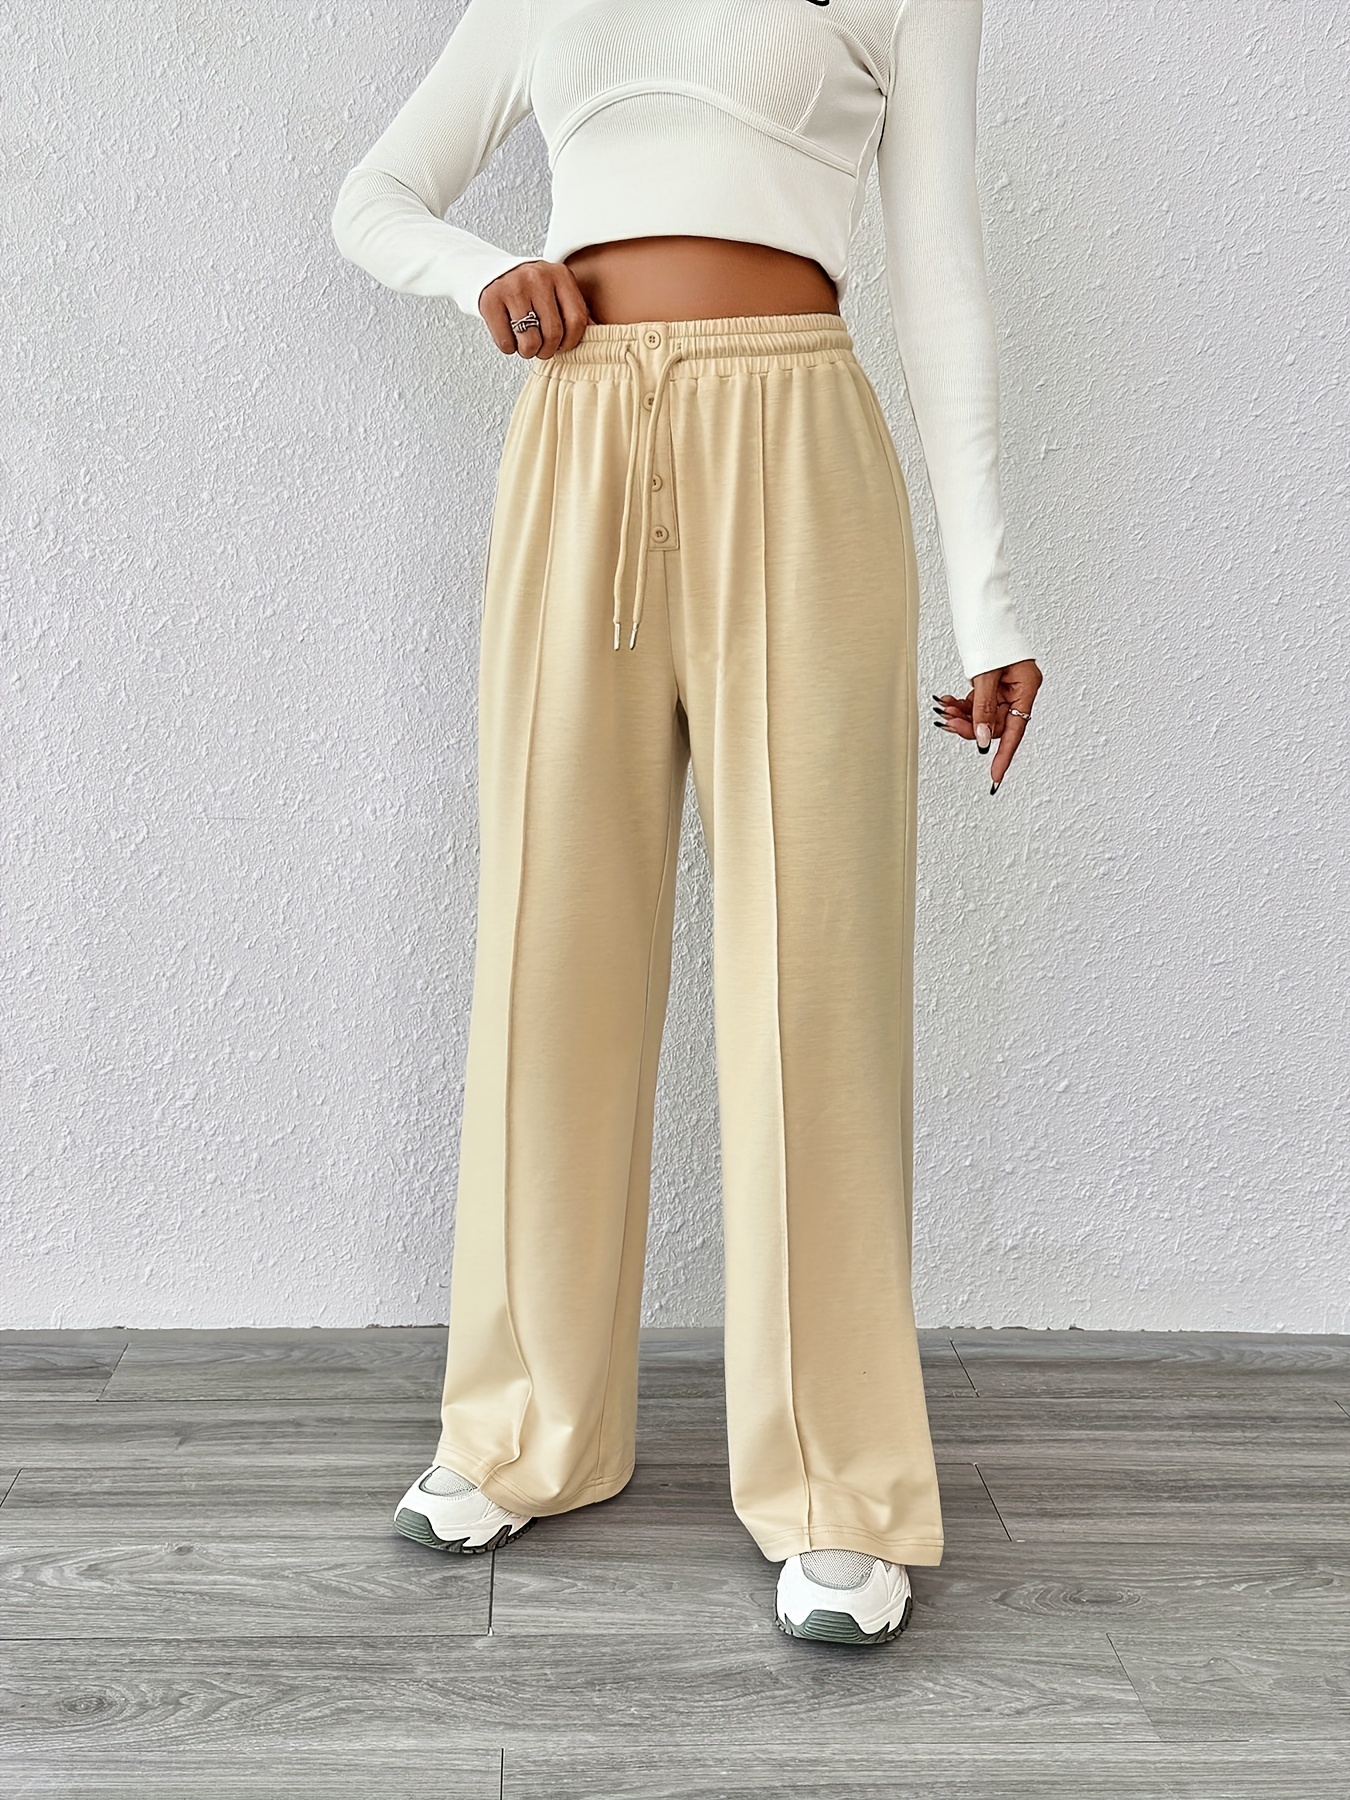  Wide Leg Sweatpants for Women Boho Elastic Ruffle Pants  Drawstring Large Plus Size Straight Leg Trousers with Pockets (Beige,  Small) : Clothing, Shoes & Jewelry